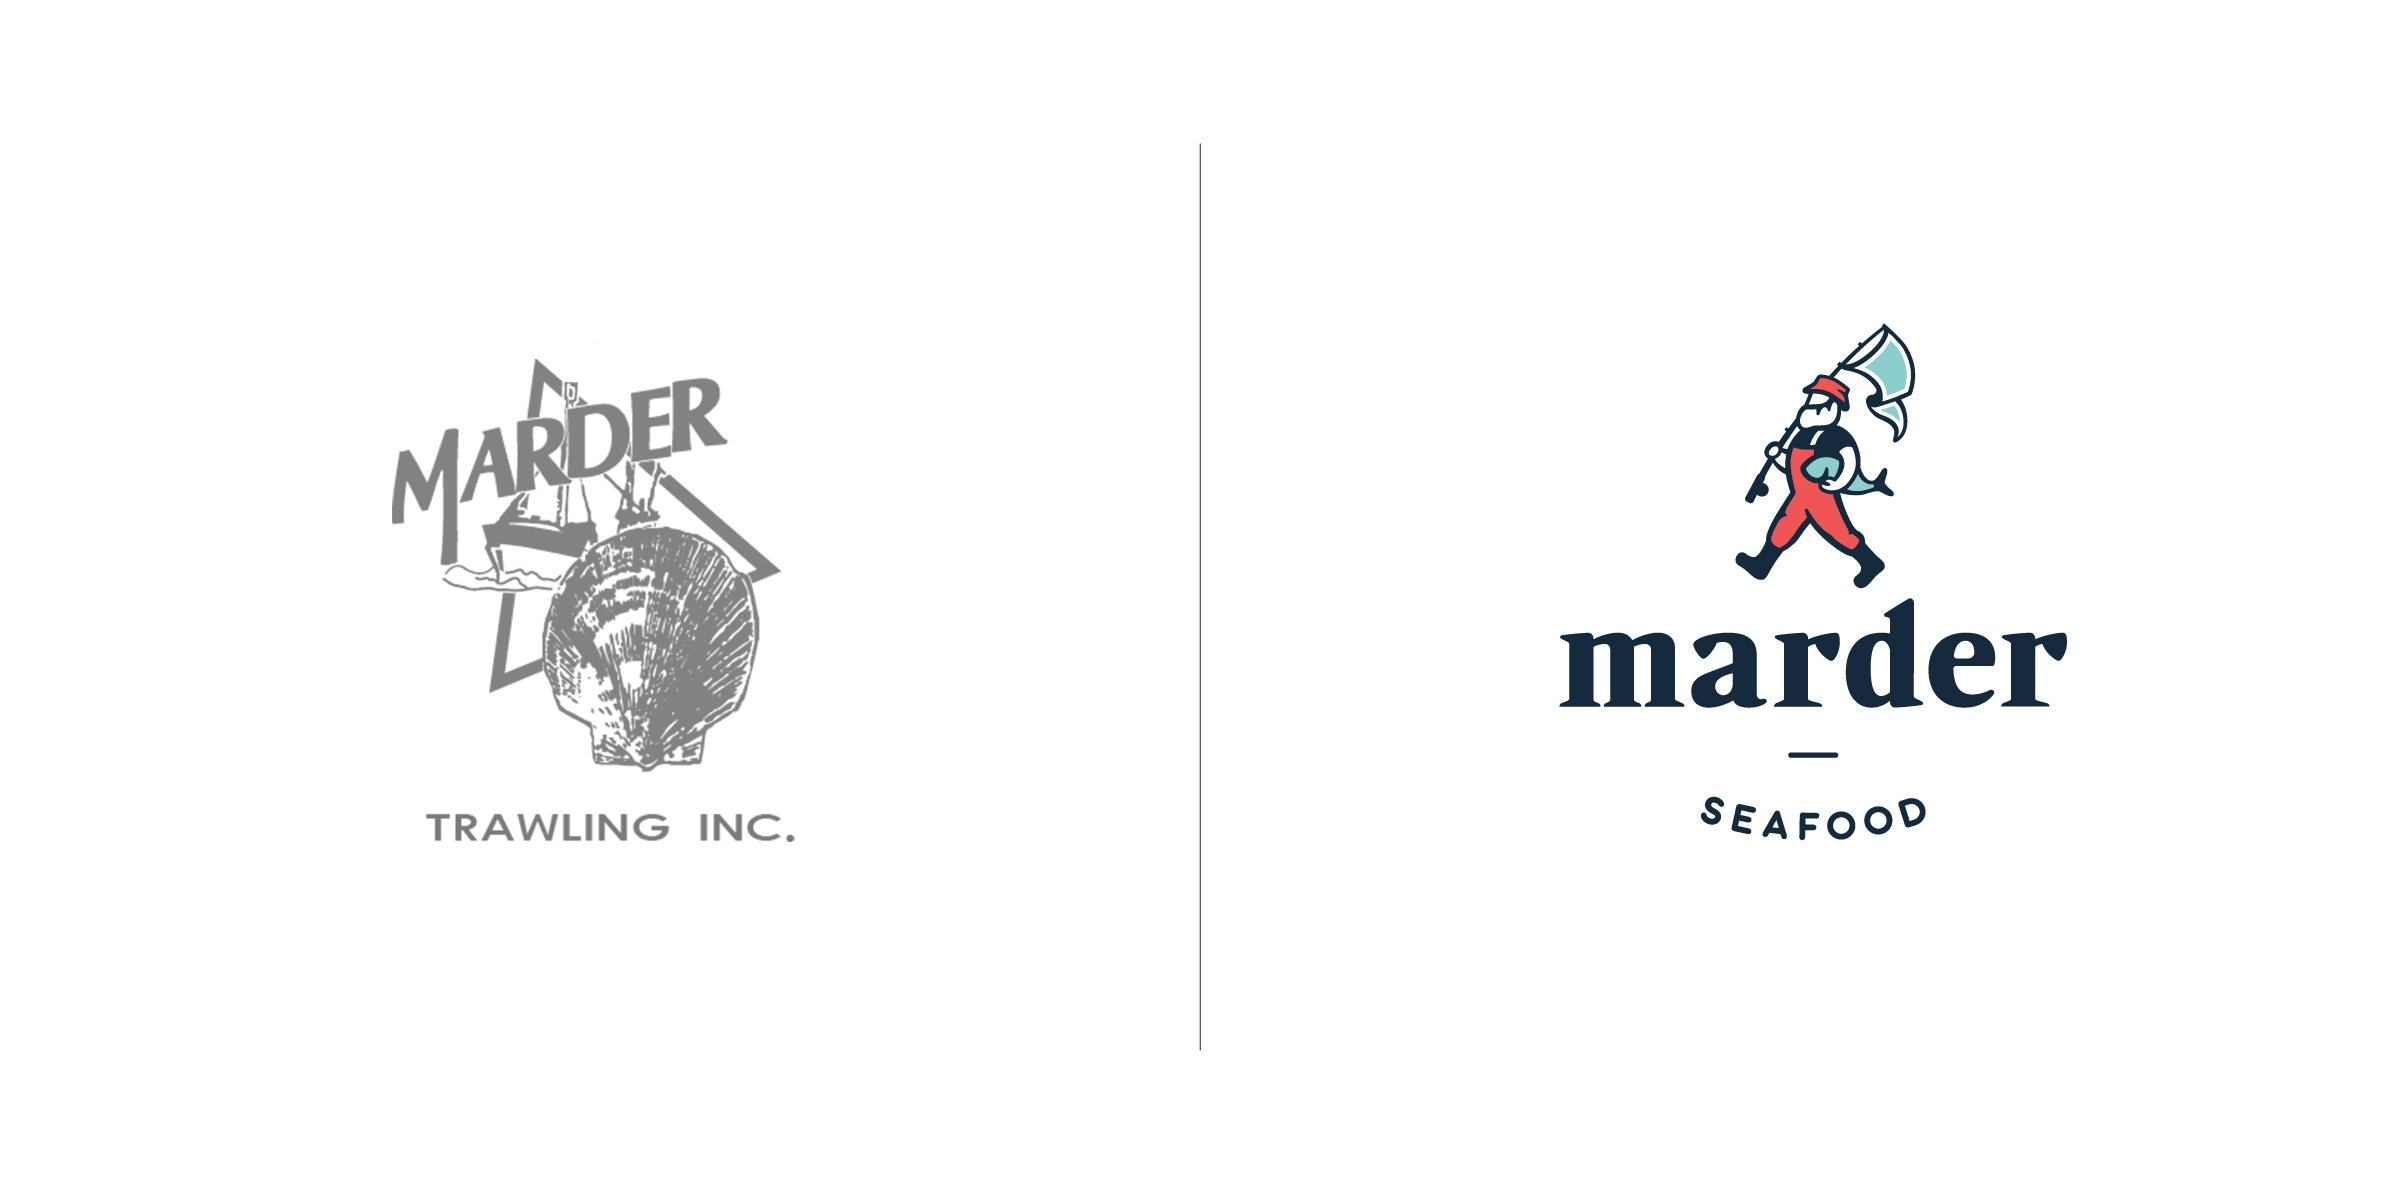  The client —   Marder Brands   The goal — To accurately reflect a forward thinking family business supporting salty, hard working fisherman who catch sustainable seafood off the cold north Atlantic waters.  